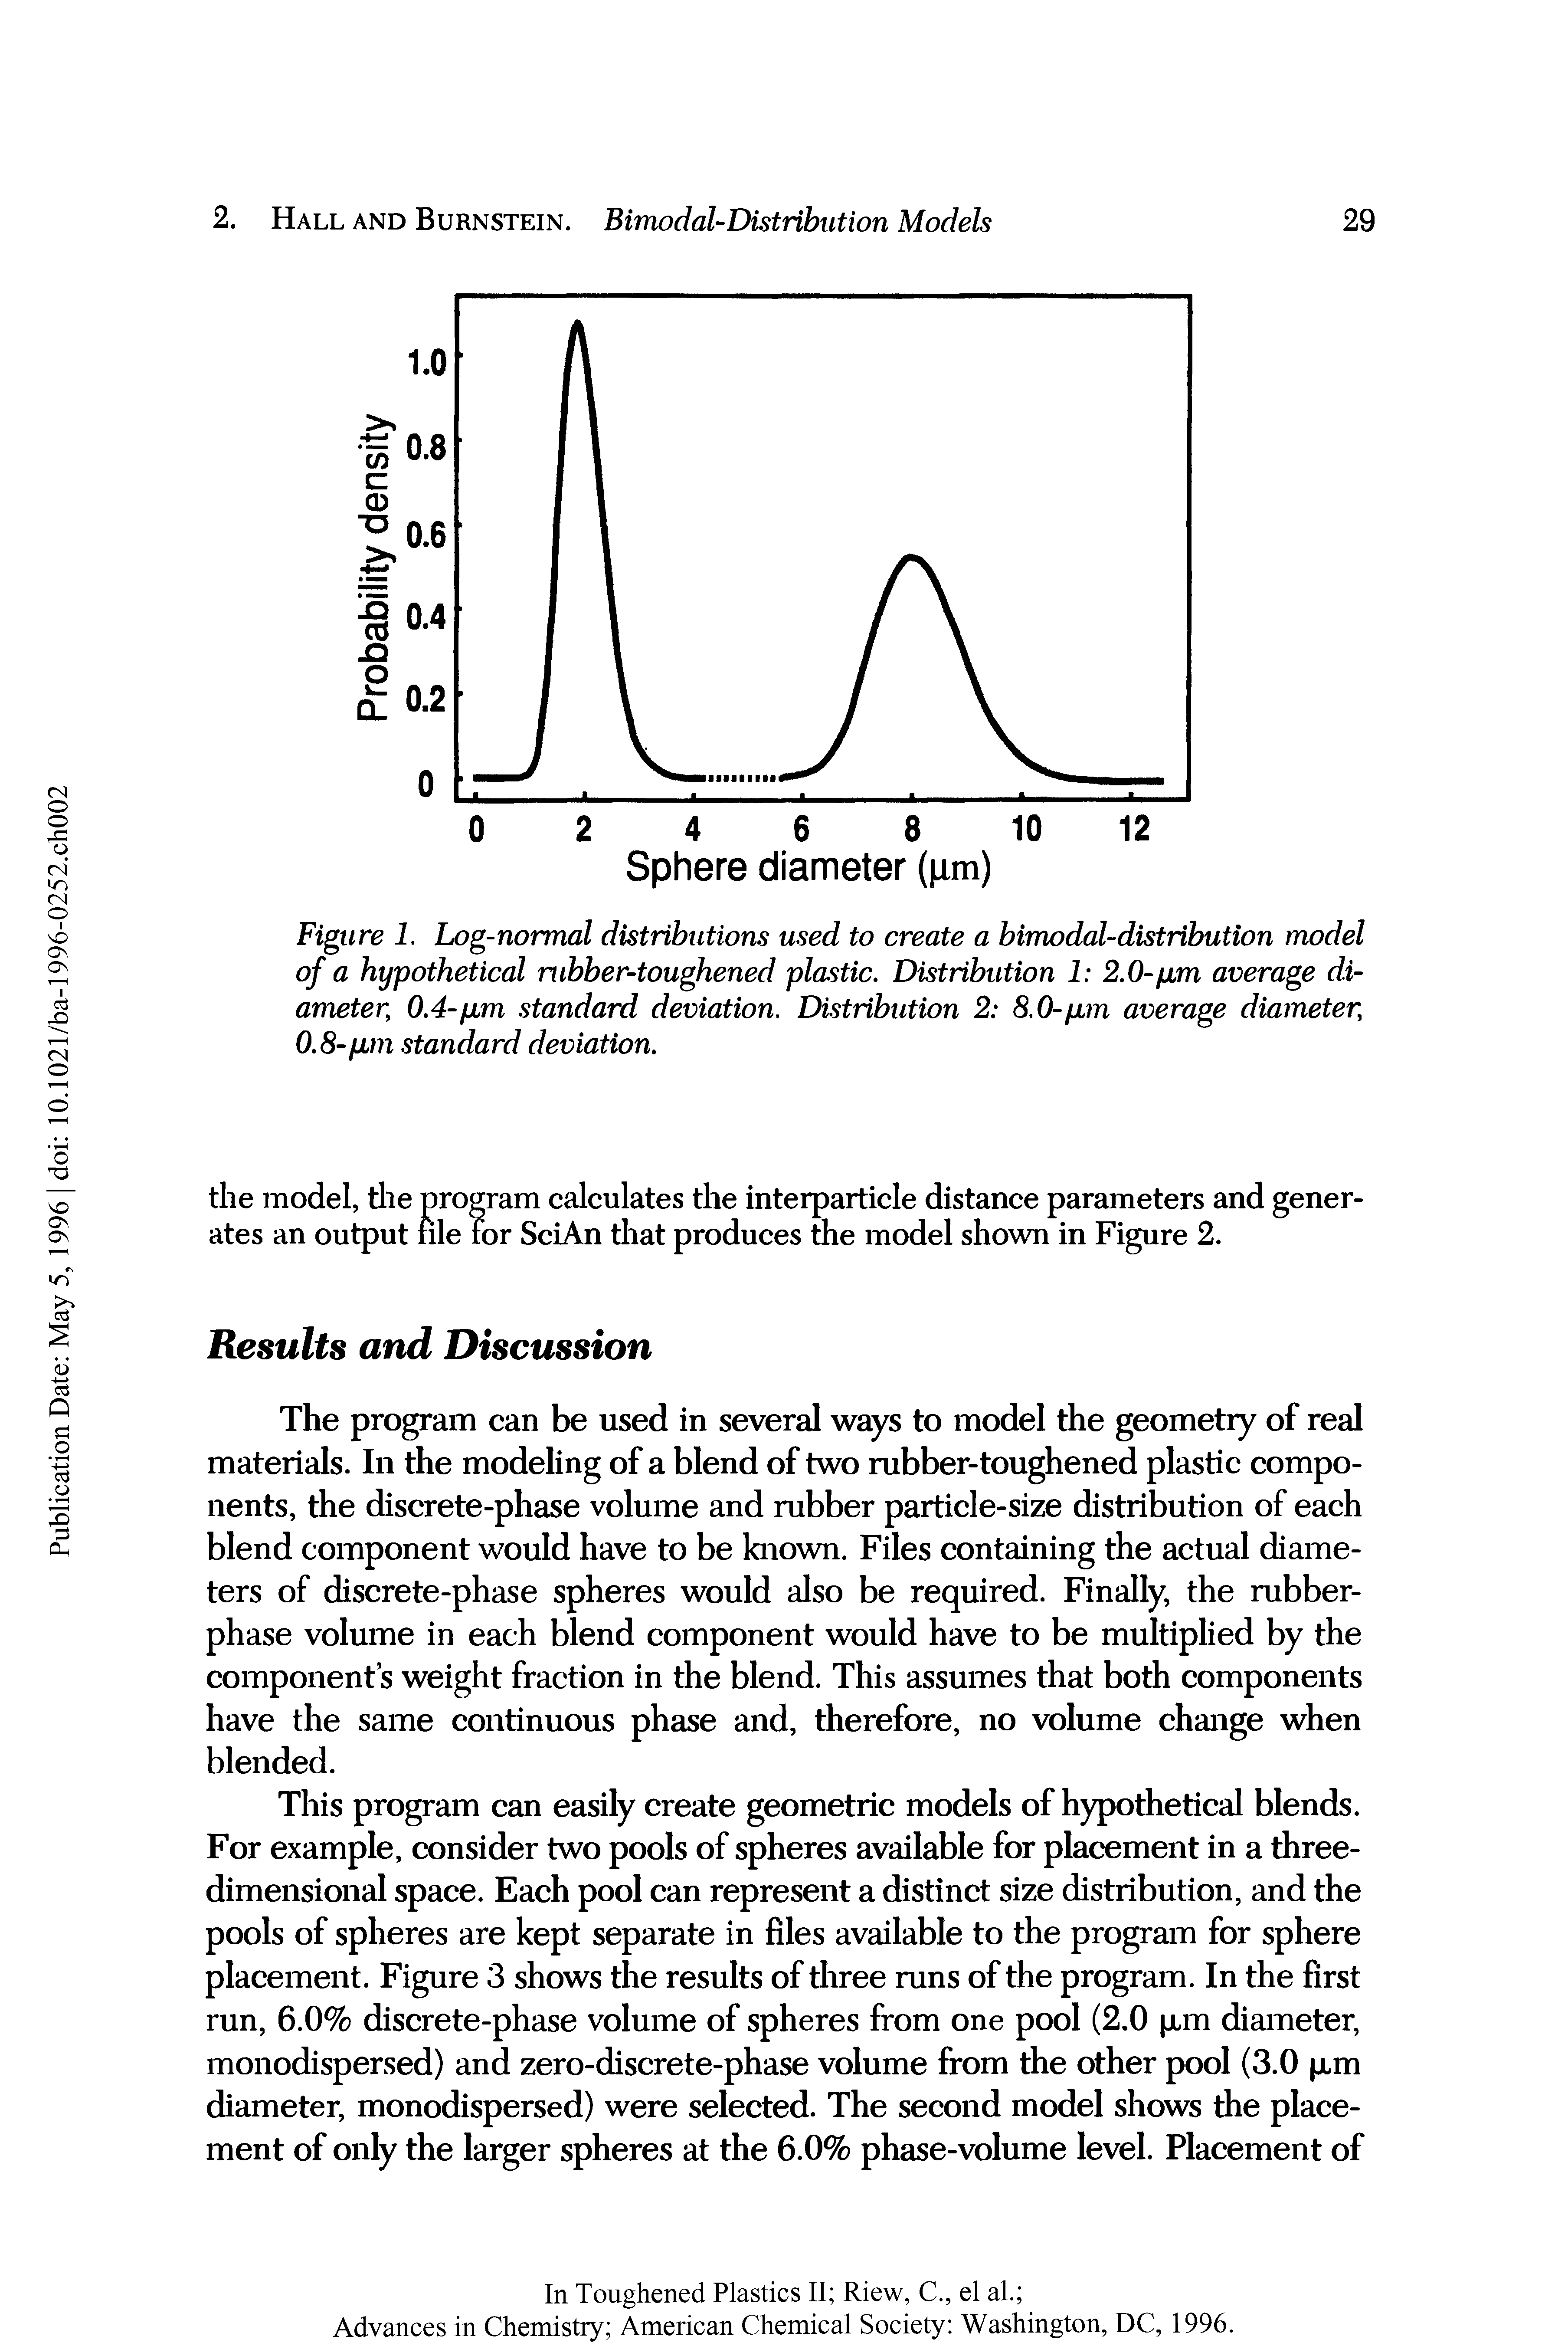 Figure 1. Log-normal distributions used to create a bimodal-distribution model of a hypothetical rubber-toughened plastic. Distribution 1 2.0-pm average diameter, 0.4-pm standard deviation. Distribution 2 8.0-pm average diameter 0.8-pm standard deviation.